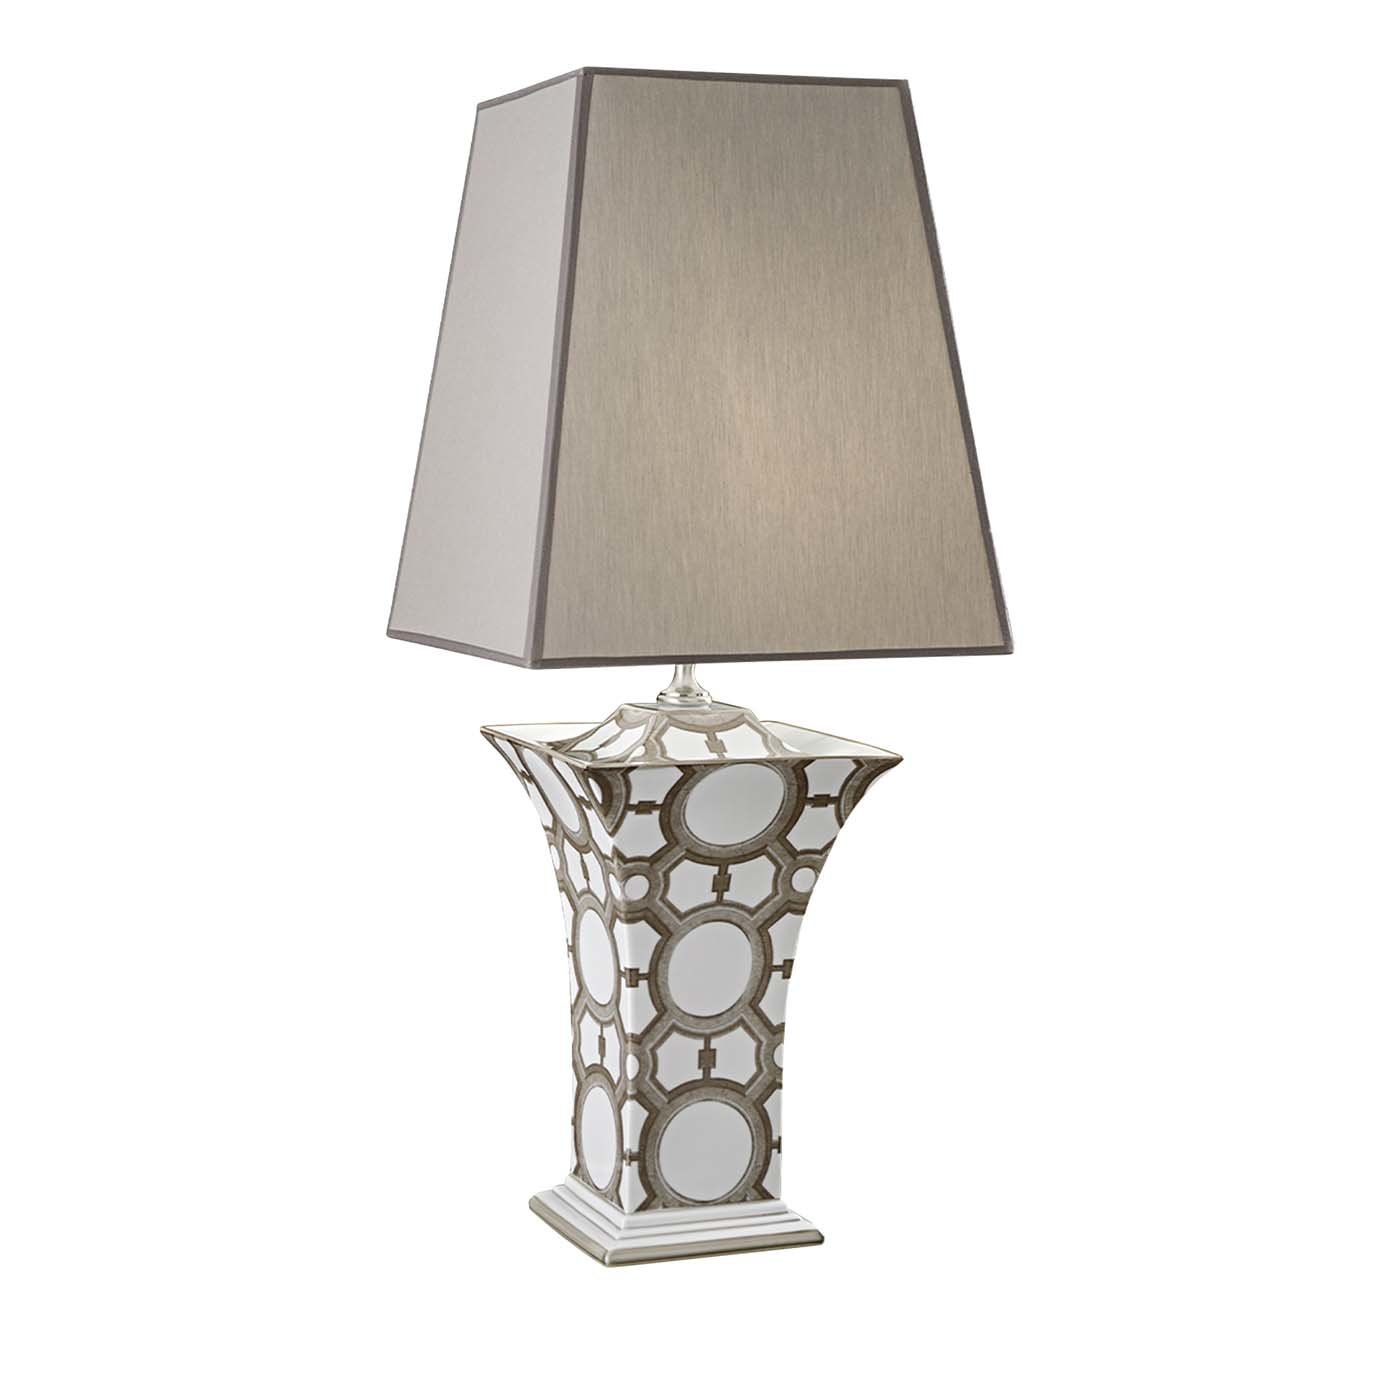 Palazzo Vecchio Taupe Table Lamp - Main view